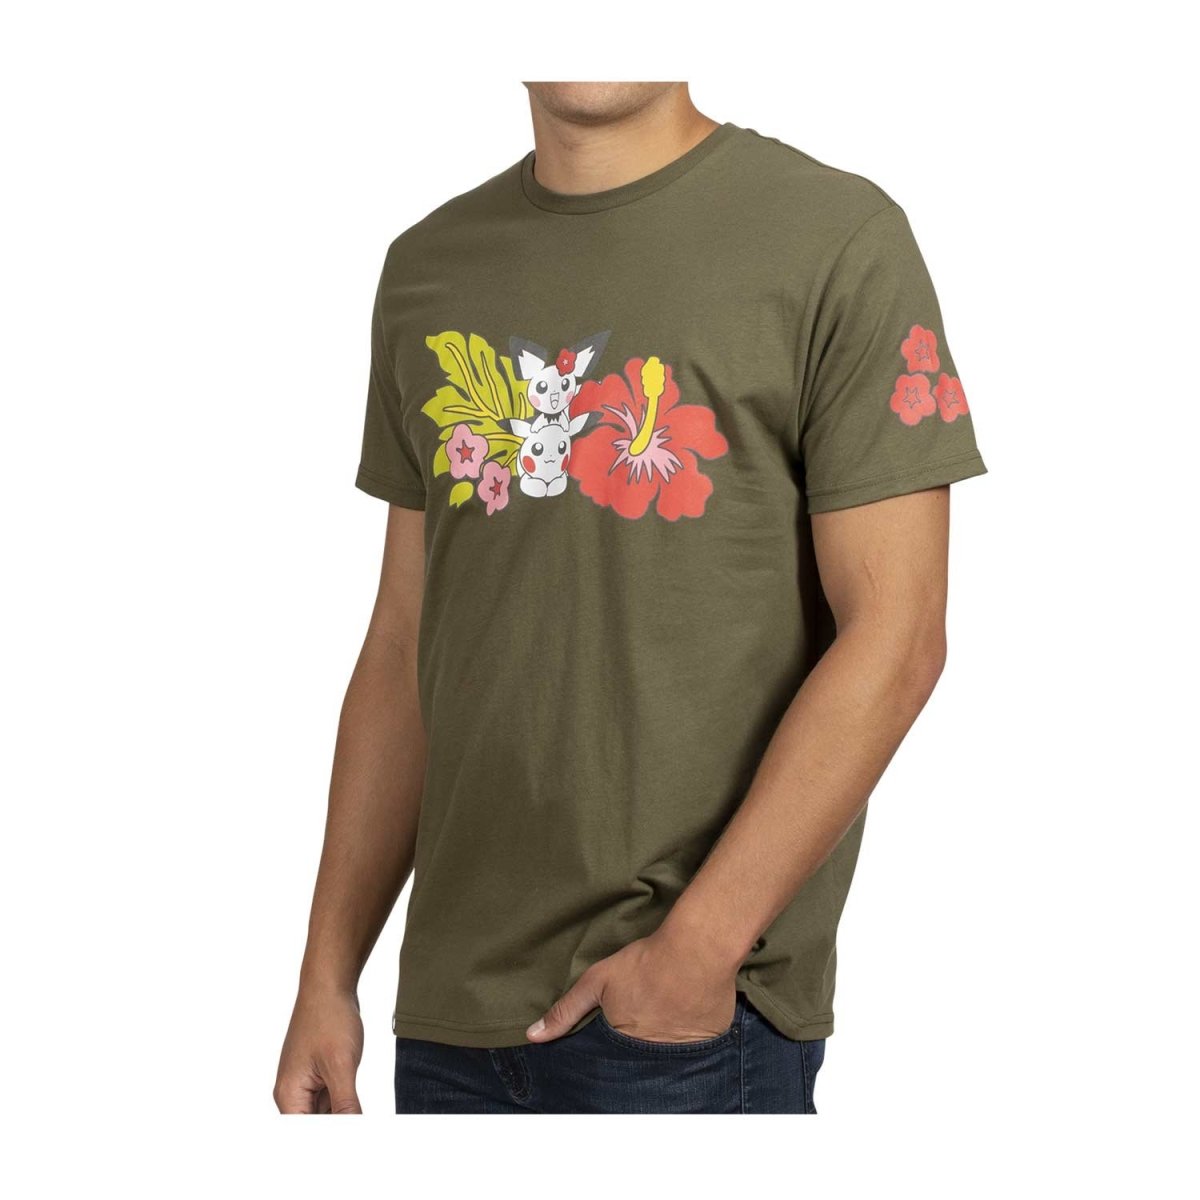 Pikachu & Pichu Military Green Relaxed Fit Crew Neck T-Shirt - Adult ...